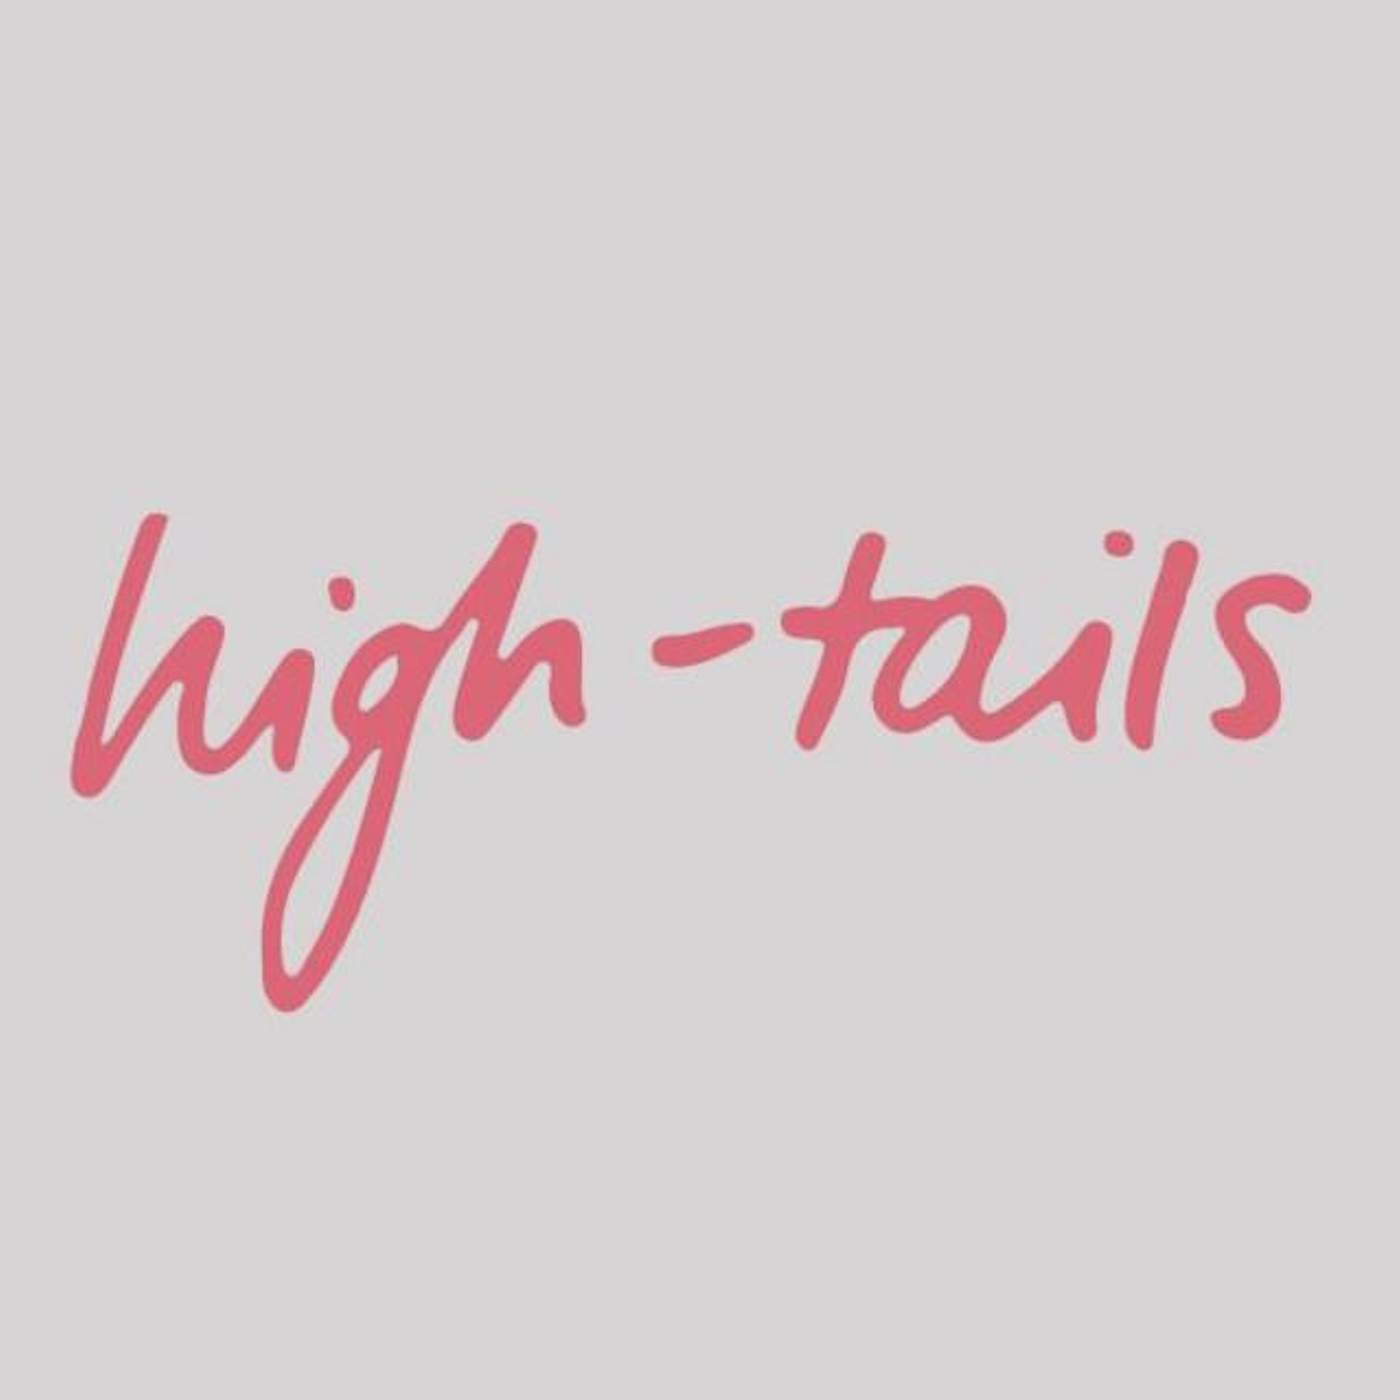 High-tails